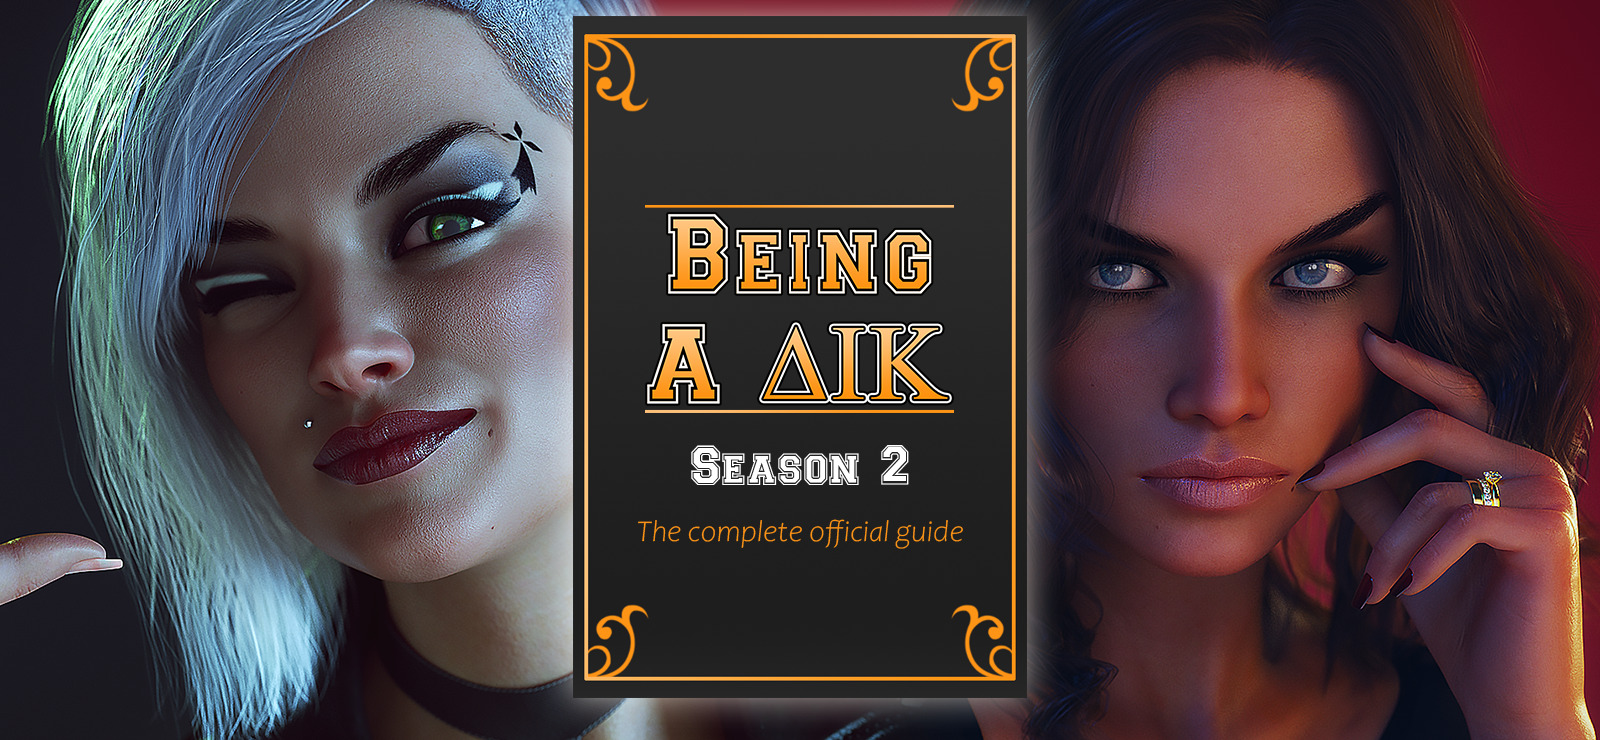 Being a dik season 2 - the complete official guide